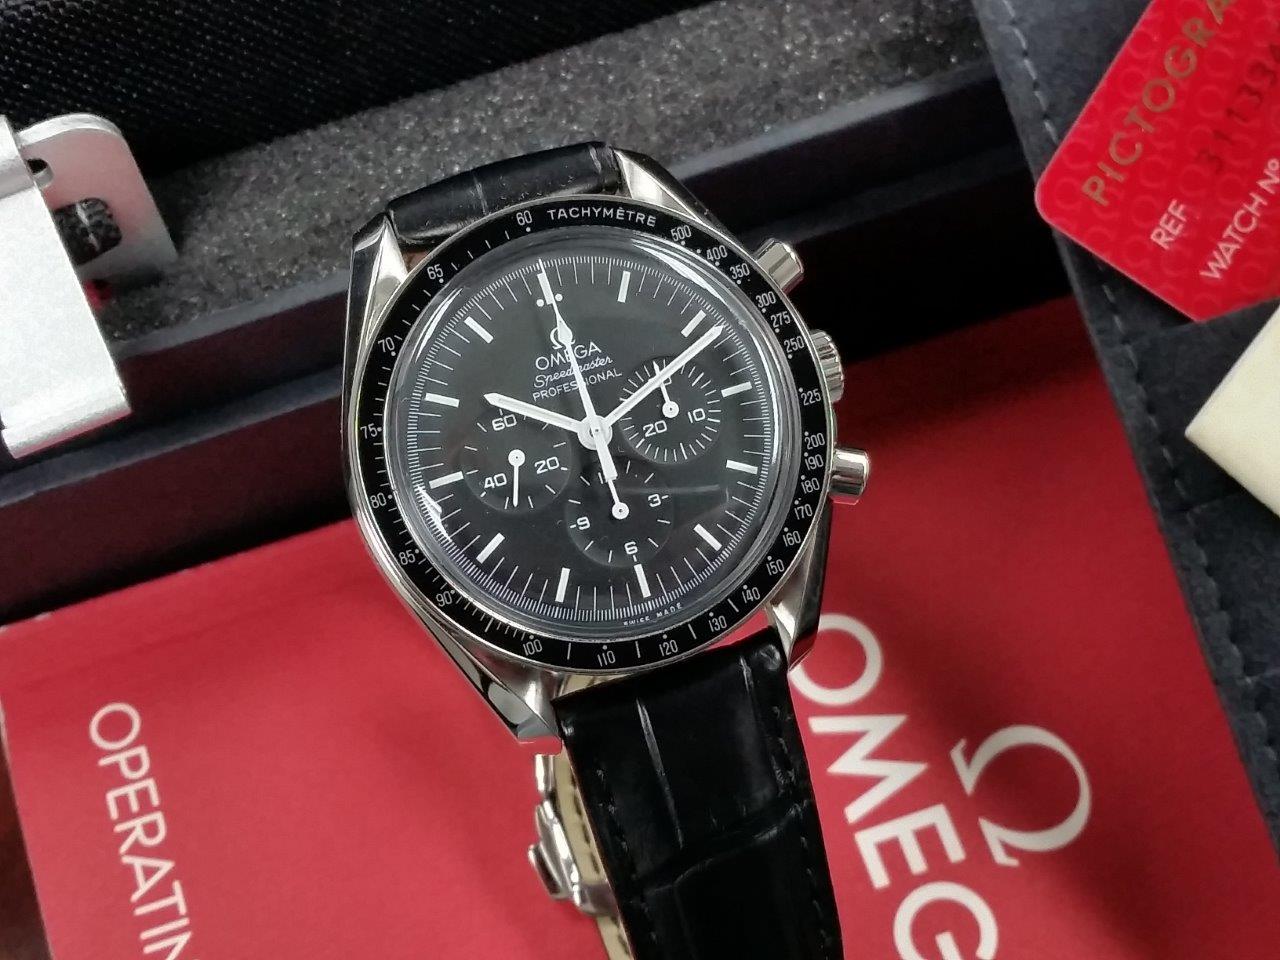 Omega SpeedMaster Professional MoonWatch 31133423001001 Black Leather Box/Papers